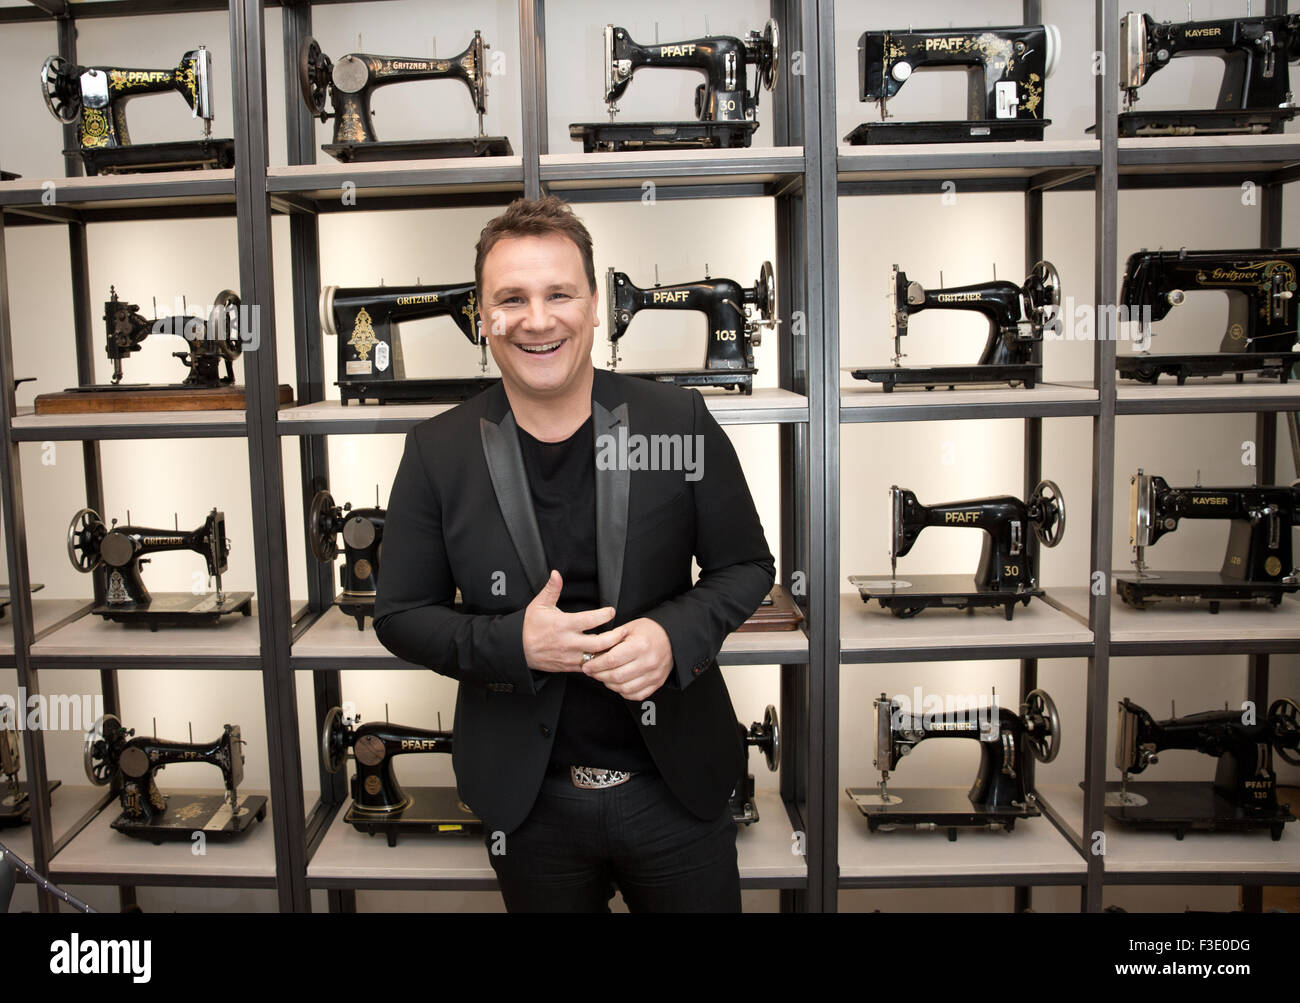 Fashion designer Guido Maria Kretschmer poses in front of shelves with antique sewing machine during filming for the VOX channel sewing competition 'Geschickt eingefaedelt - Wer naeht am besten?' (lit. Skilfully threaded - who sews the best?) in Berlin, Germany, 23 April 2015. Photo: JOERG CARSTENSEN/dpa Stock Photo